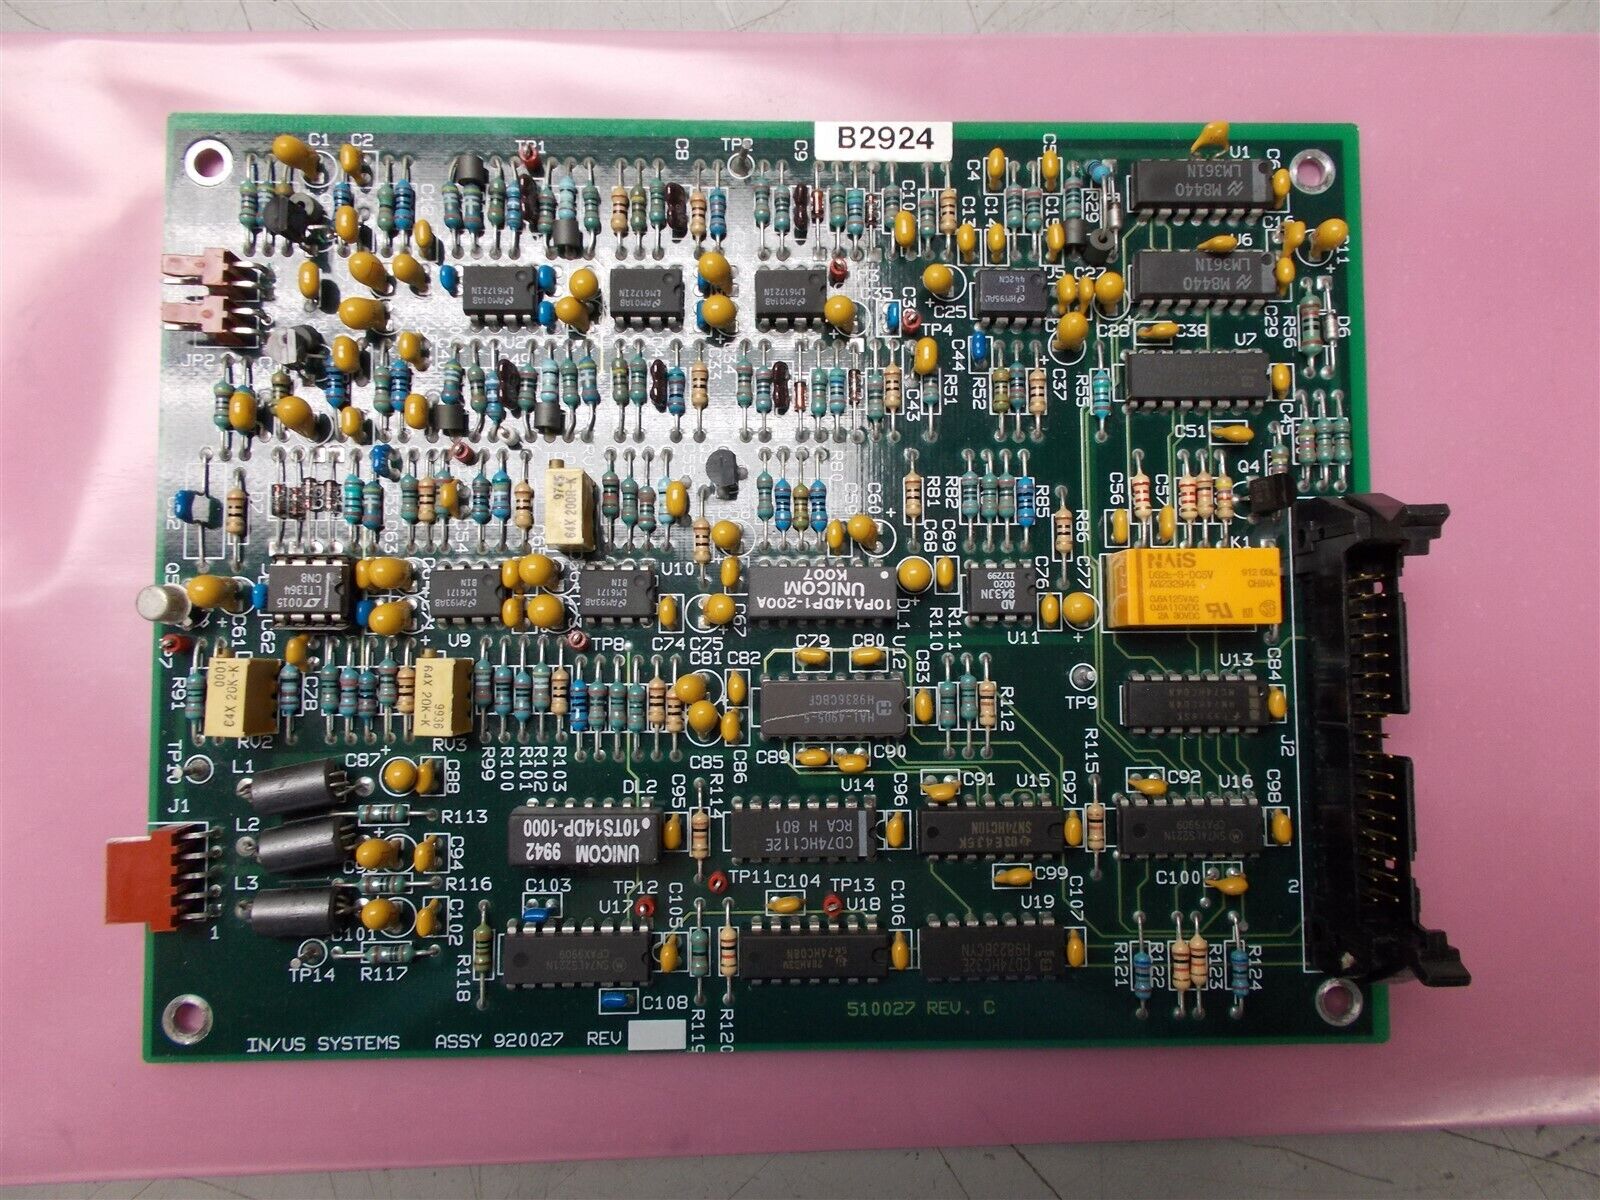 IN/US Systems Board Assy 920027 Removed From IN/US Systems B-RAM Model 3